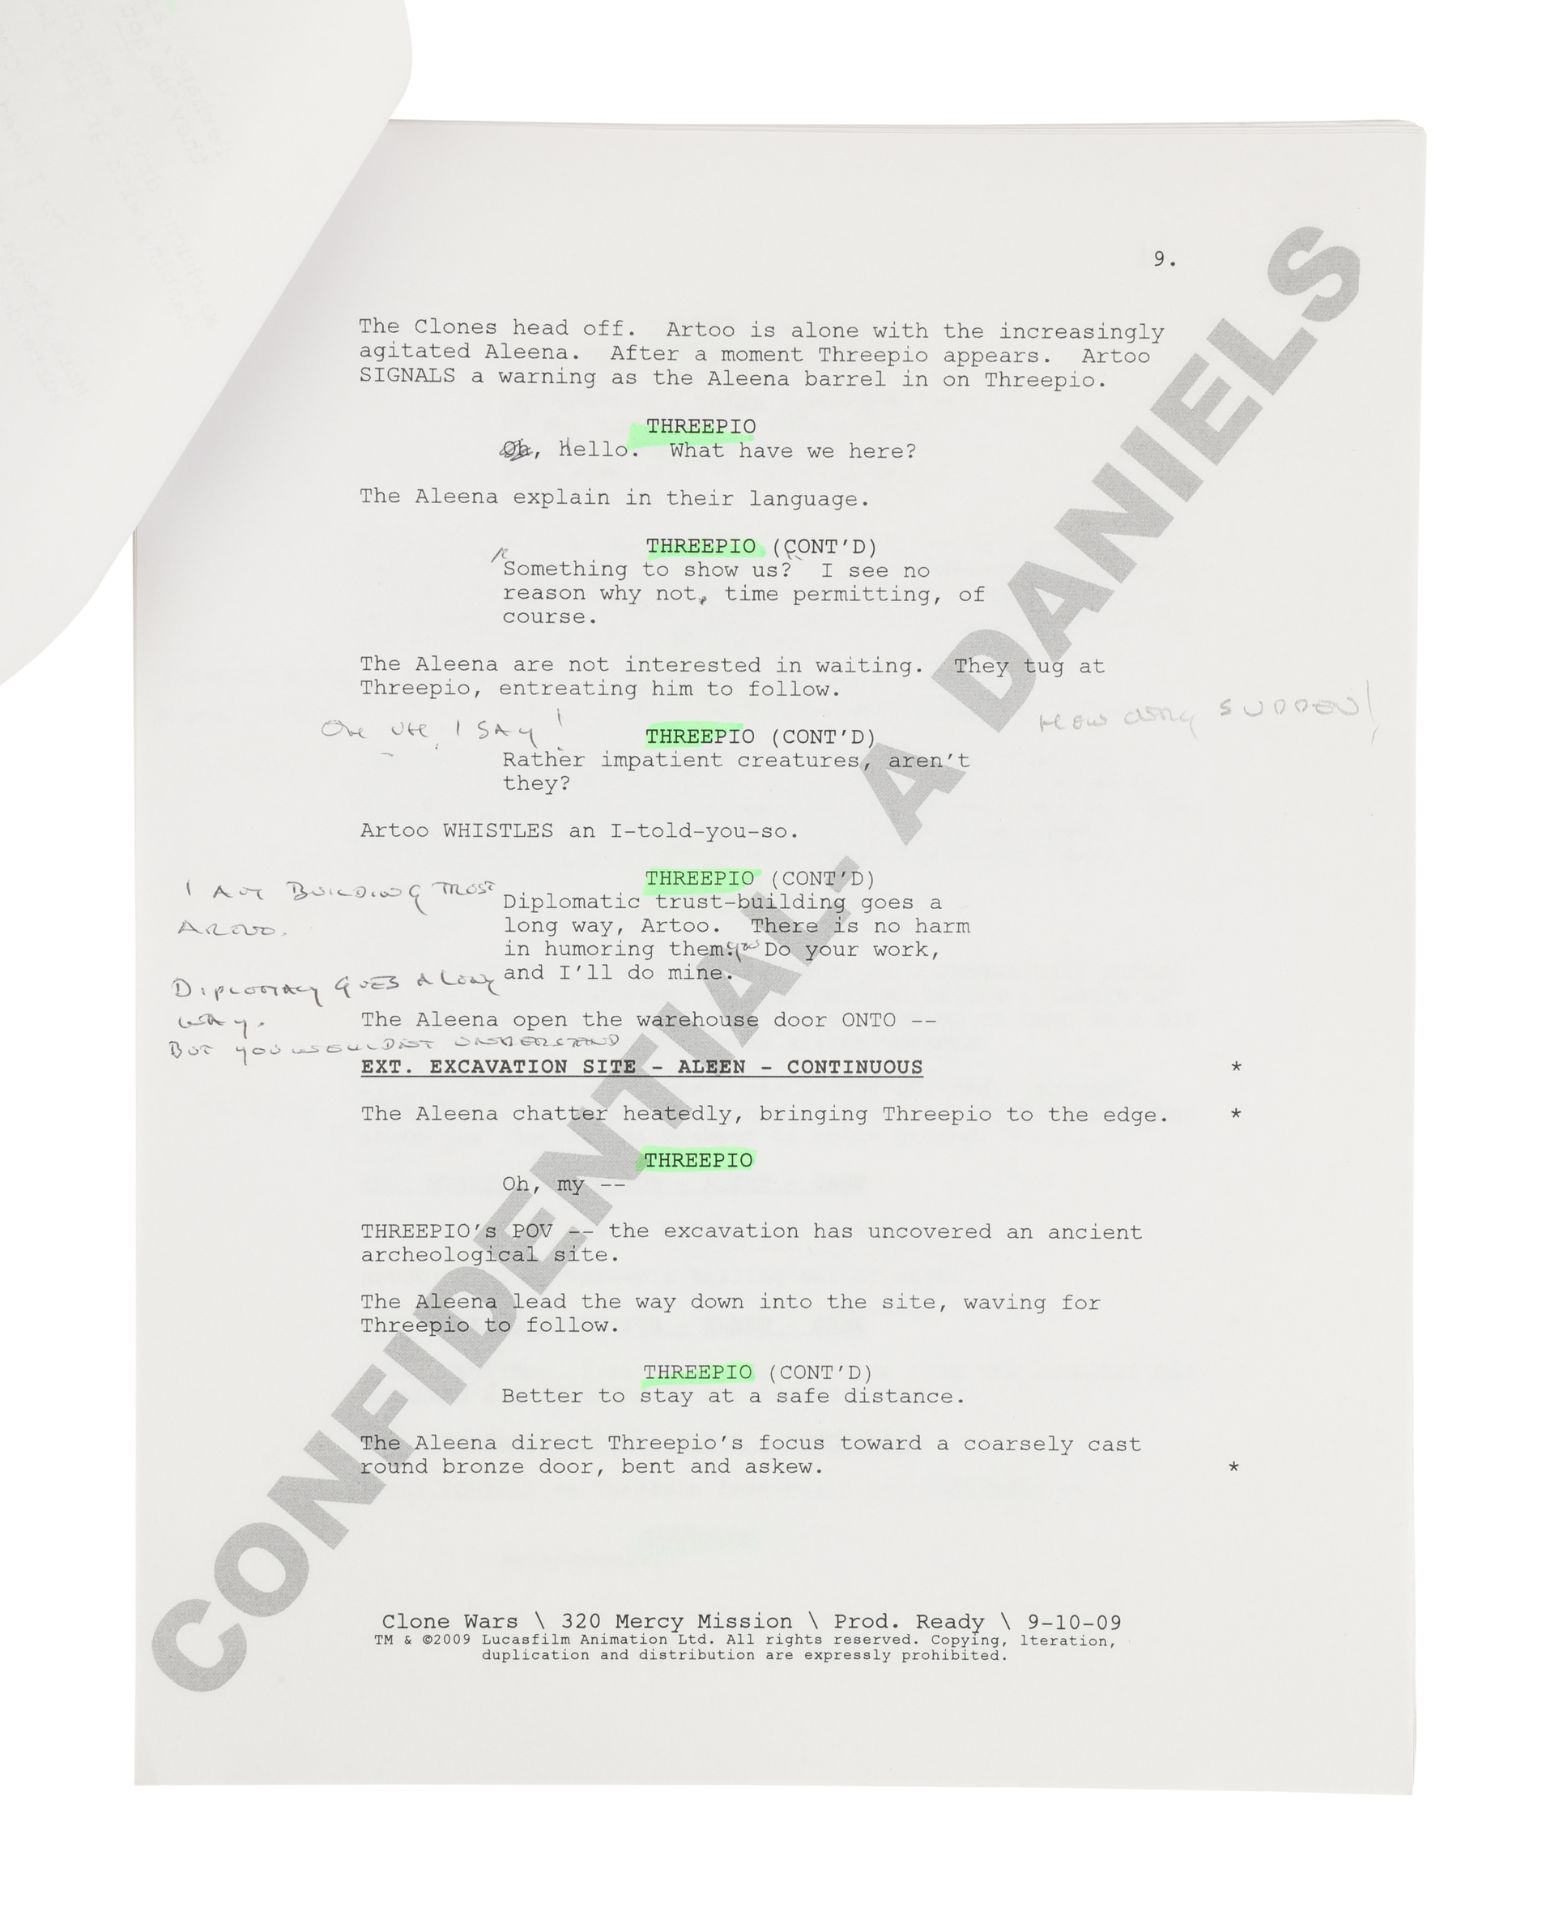 STAR WARS: THE CLONE WARS (2008-2020) - Anthony Daniels Collection: Pair of Anthony Daniels' Scripts - Image 8 of 12